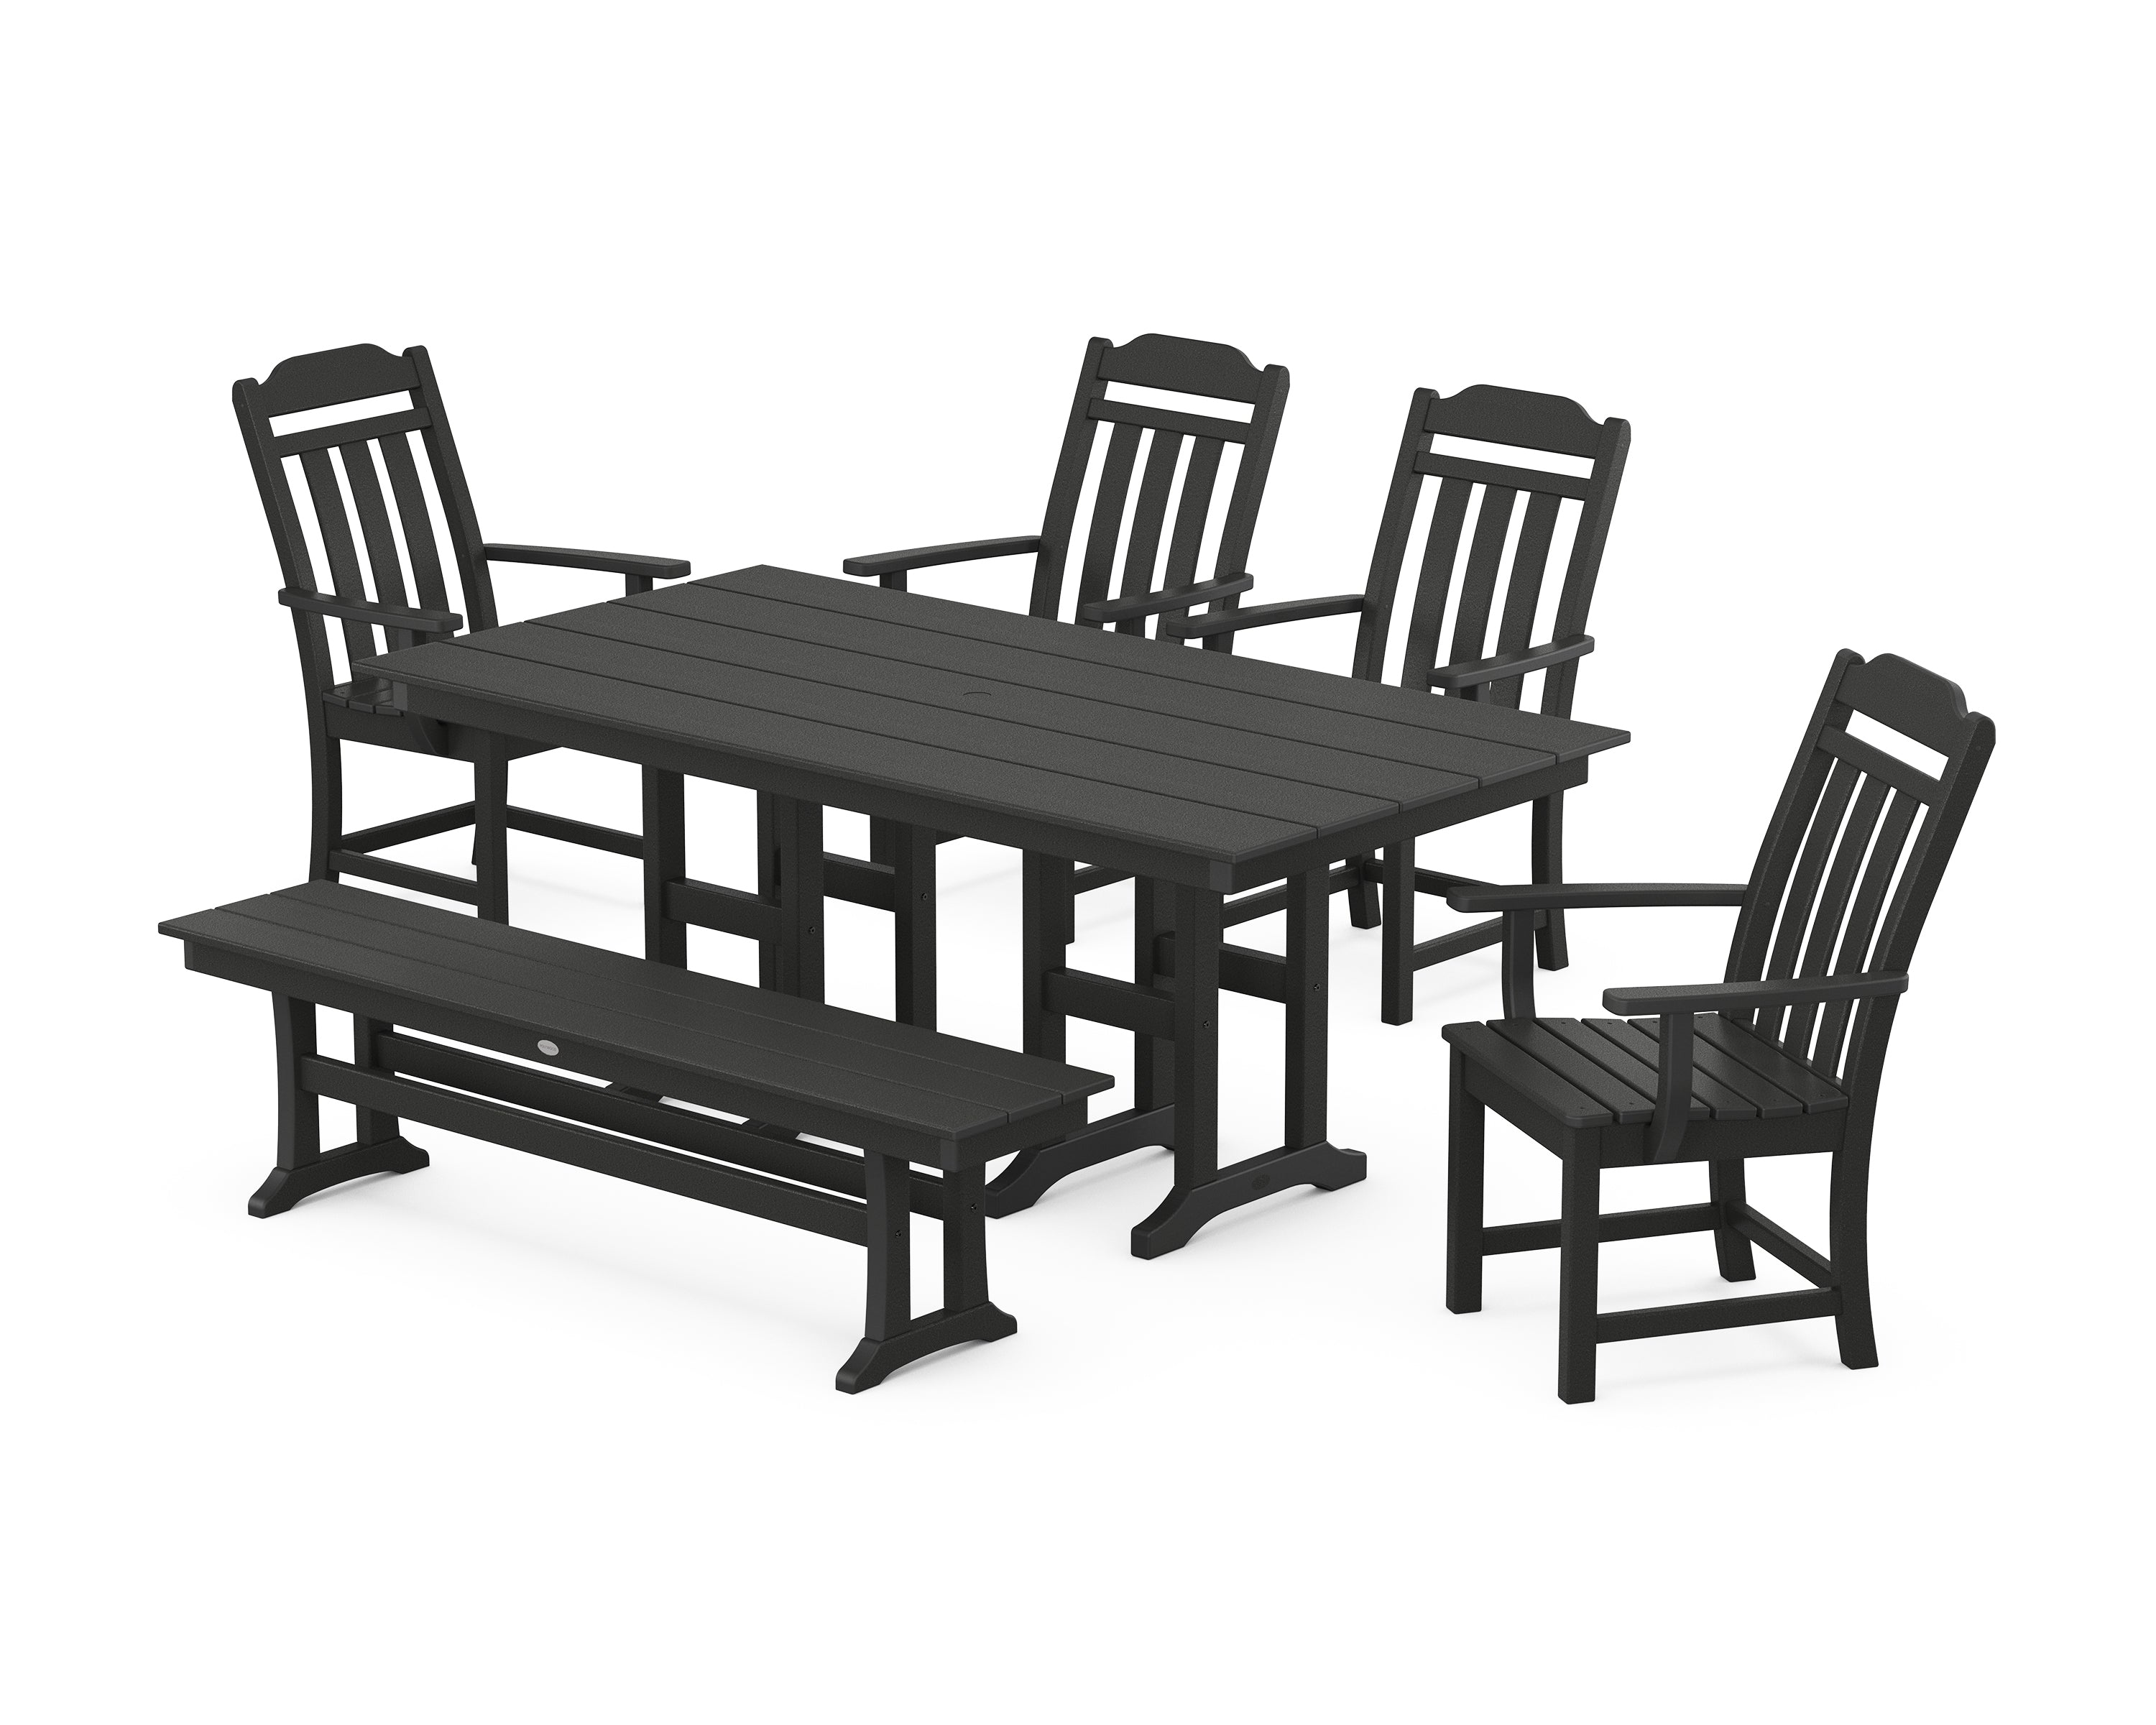 Polywood Country Living 6-Piece Farmhouse Dining Set with Bench in Black